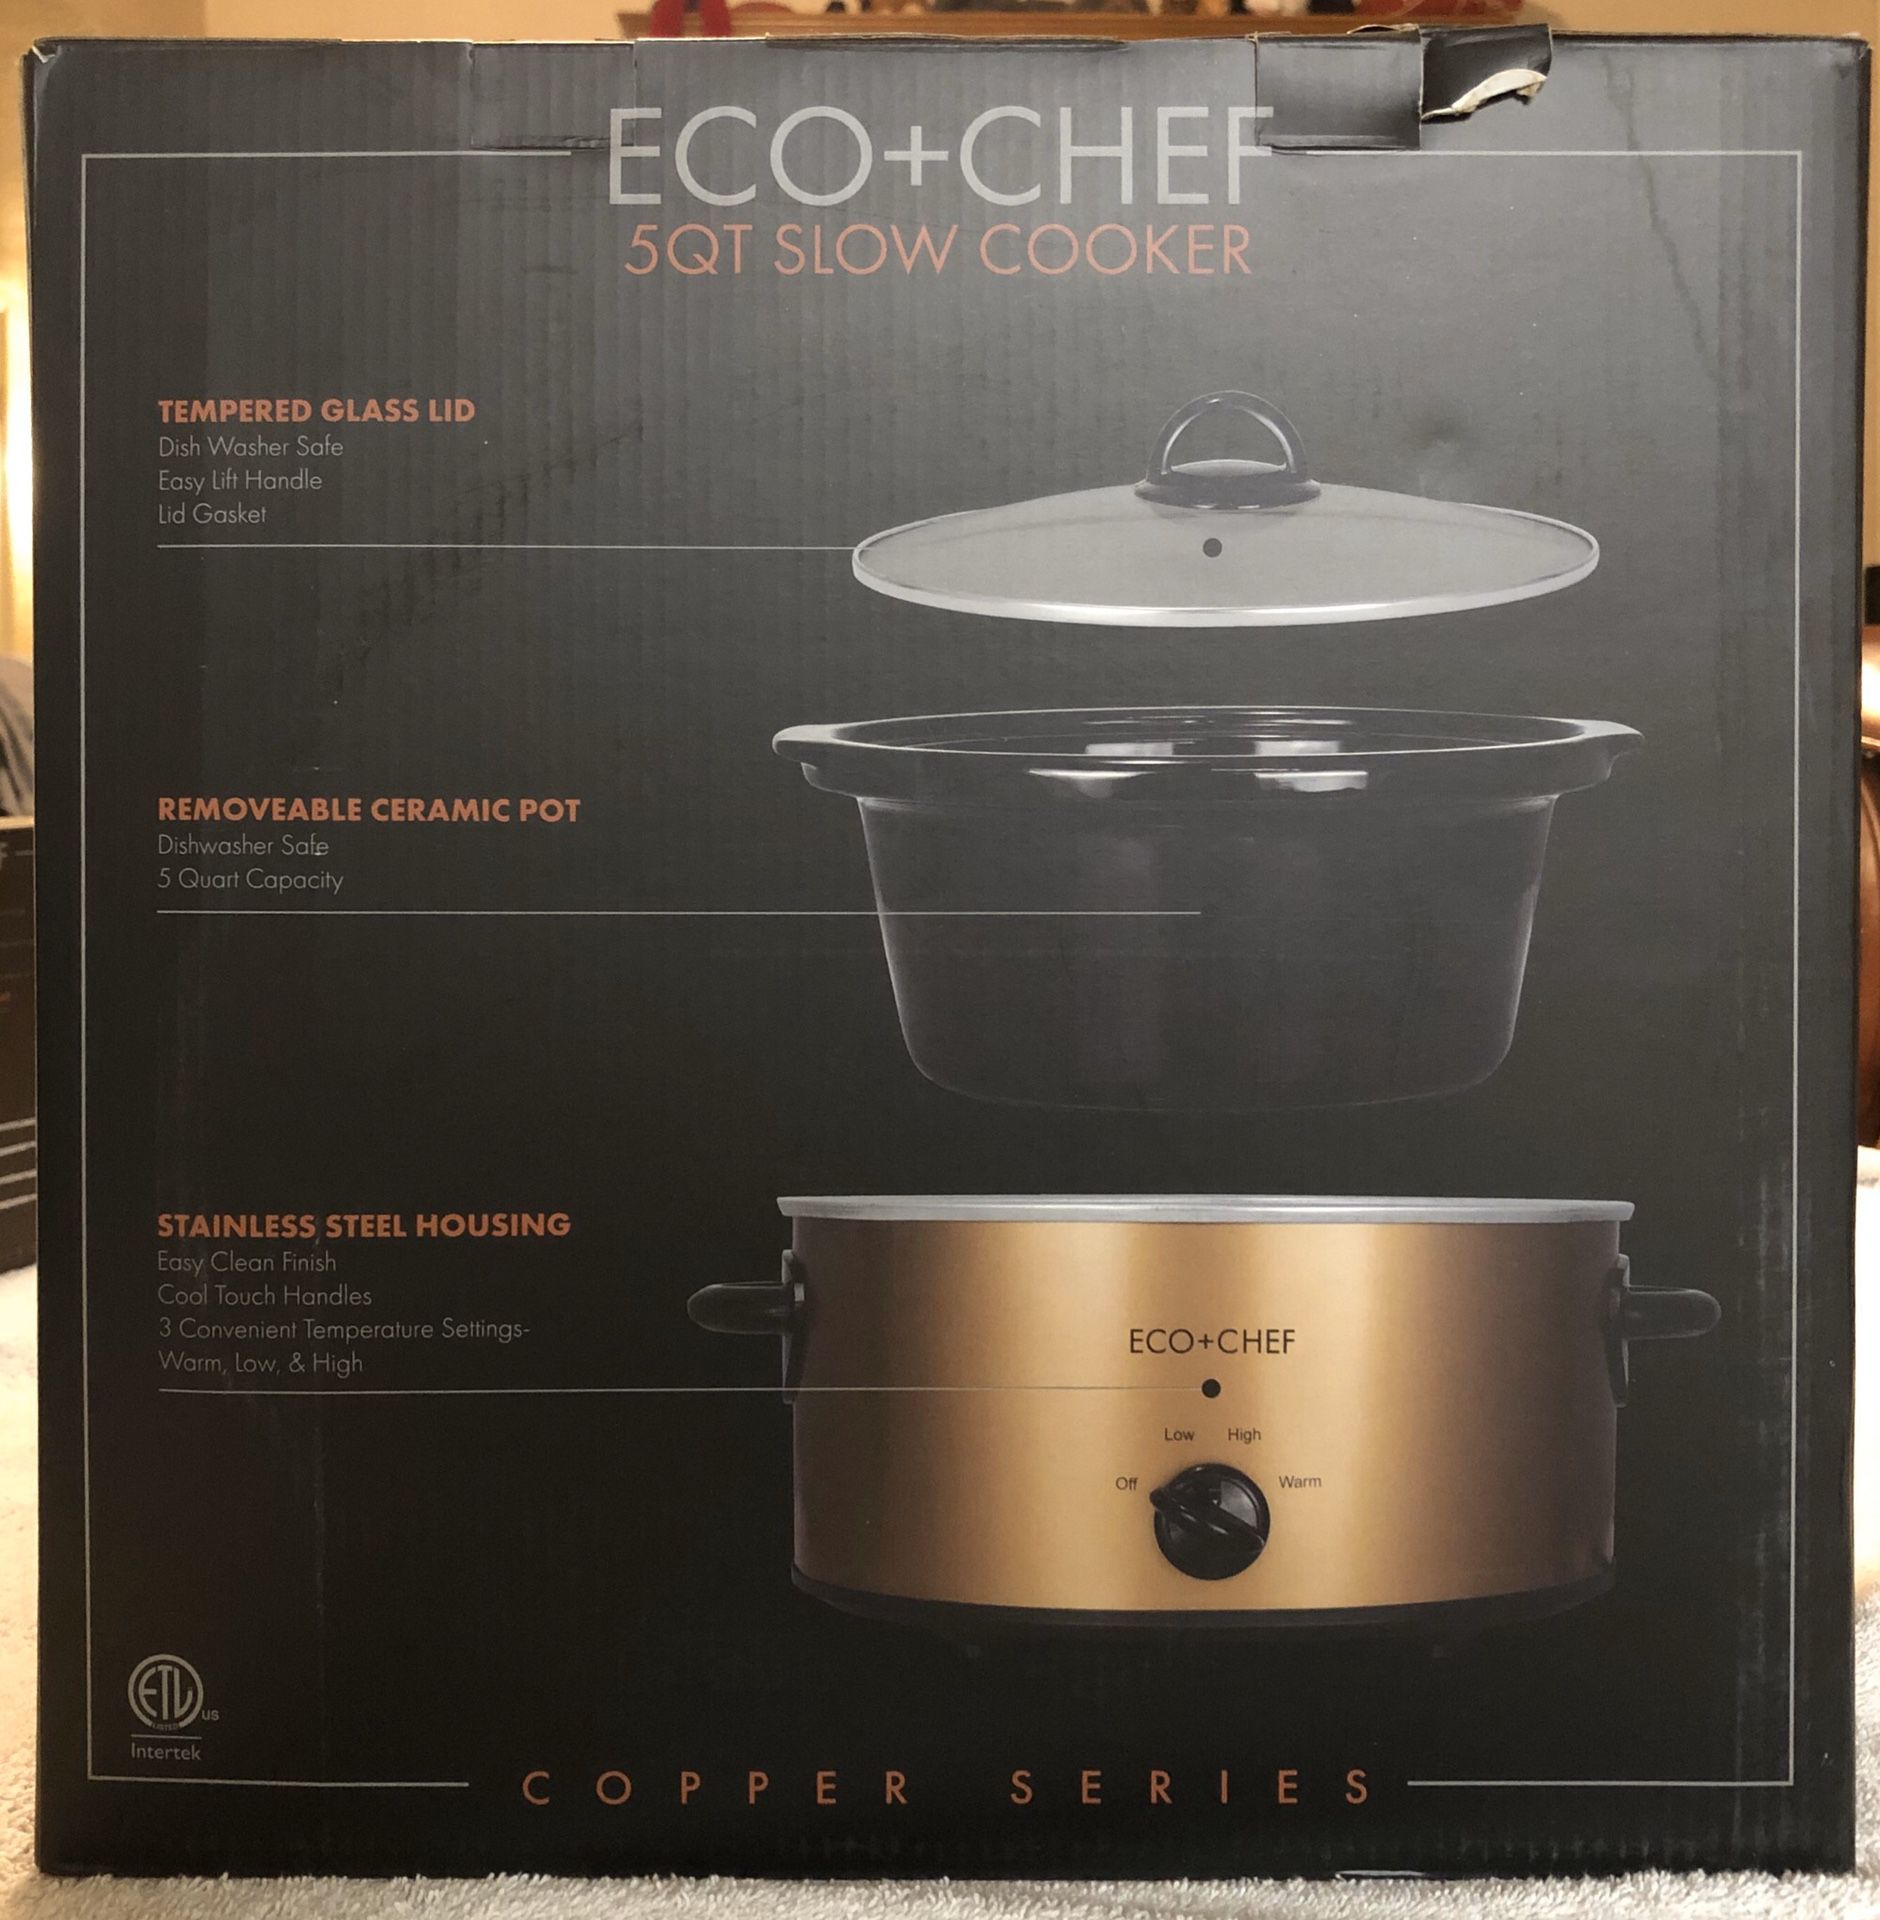 Only $17.85 (Regular $100) Cooks XL 10 Quart Slow Cooker - Deal Hunting Babe